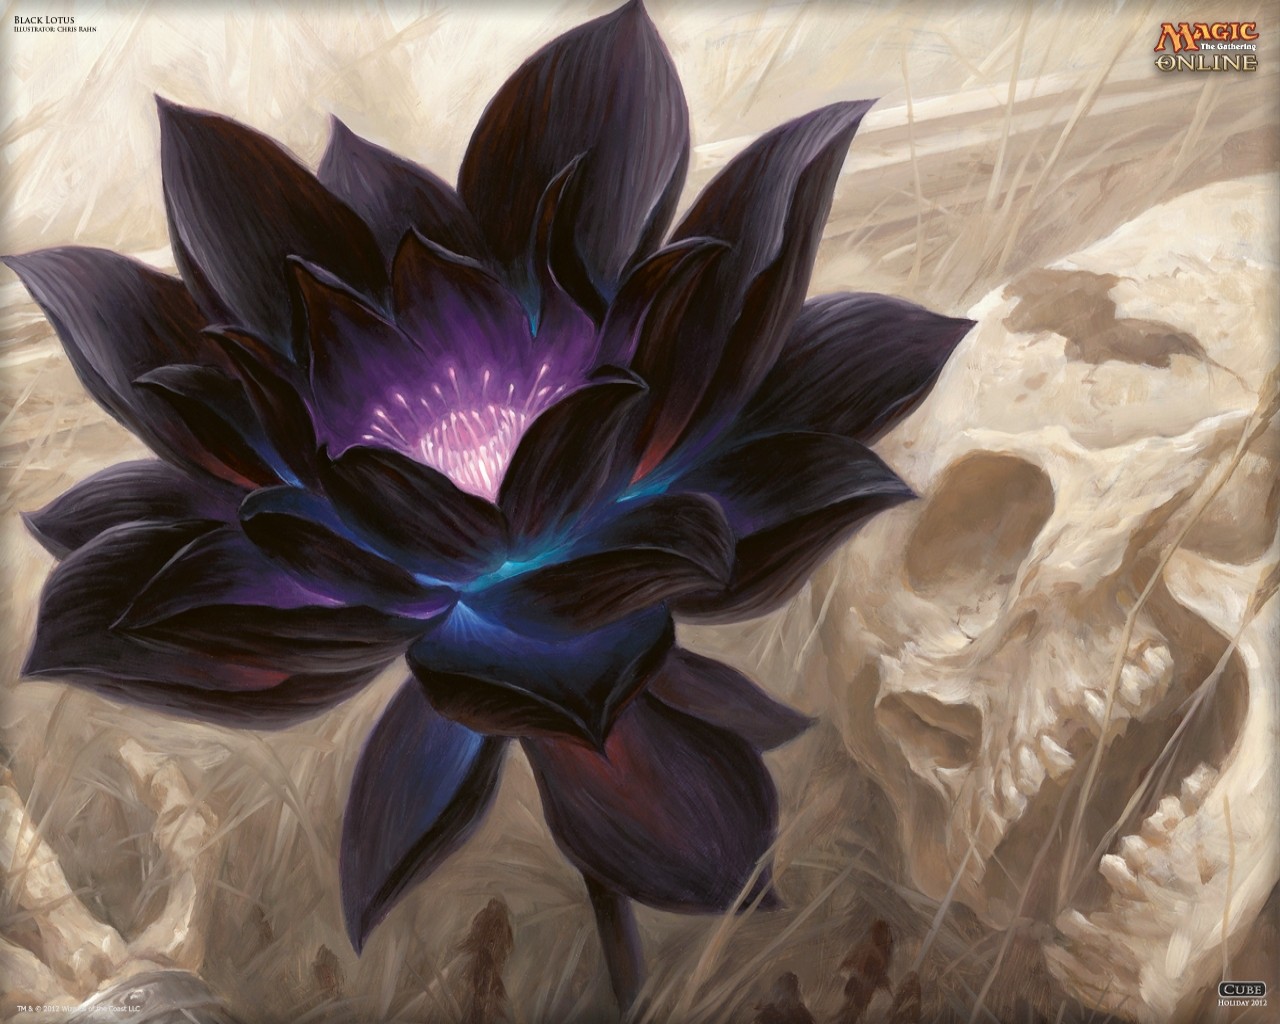 General 1280x1024 fantasy art Magic: The Gathering lotus flowers Trading Card Games flowers plants